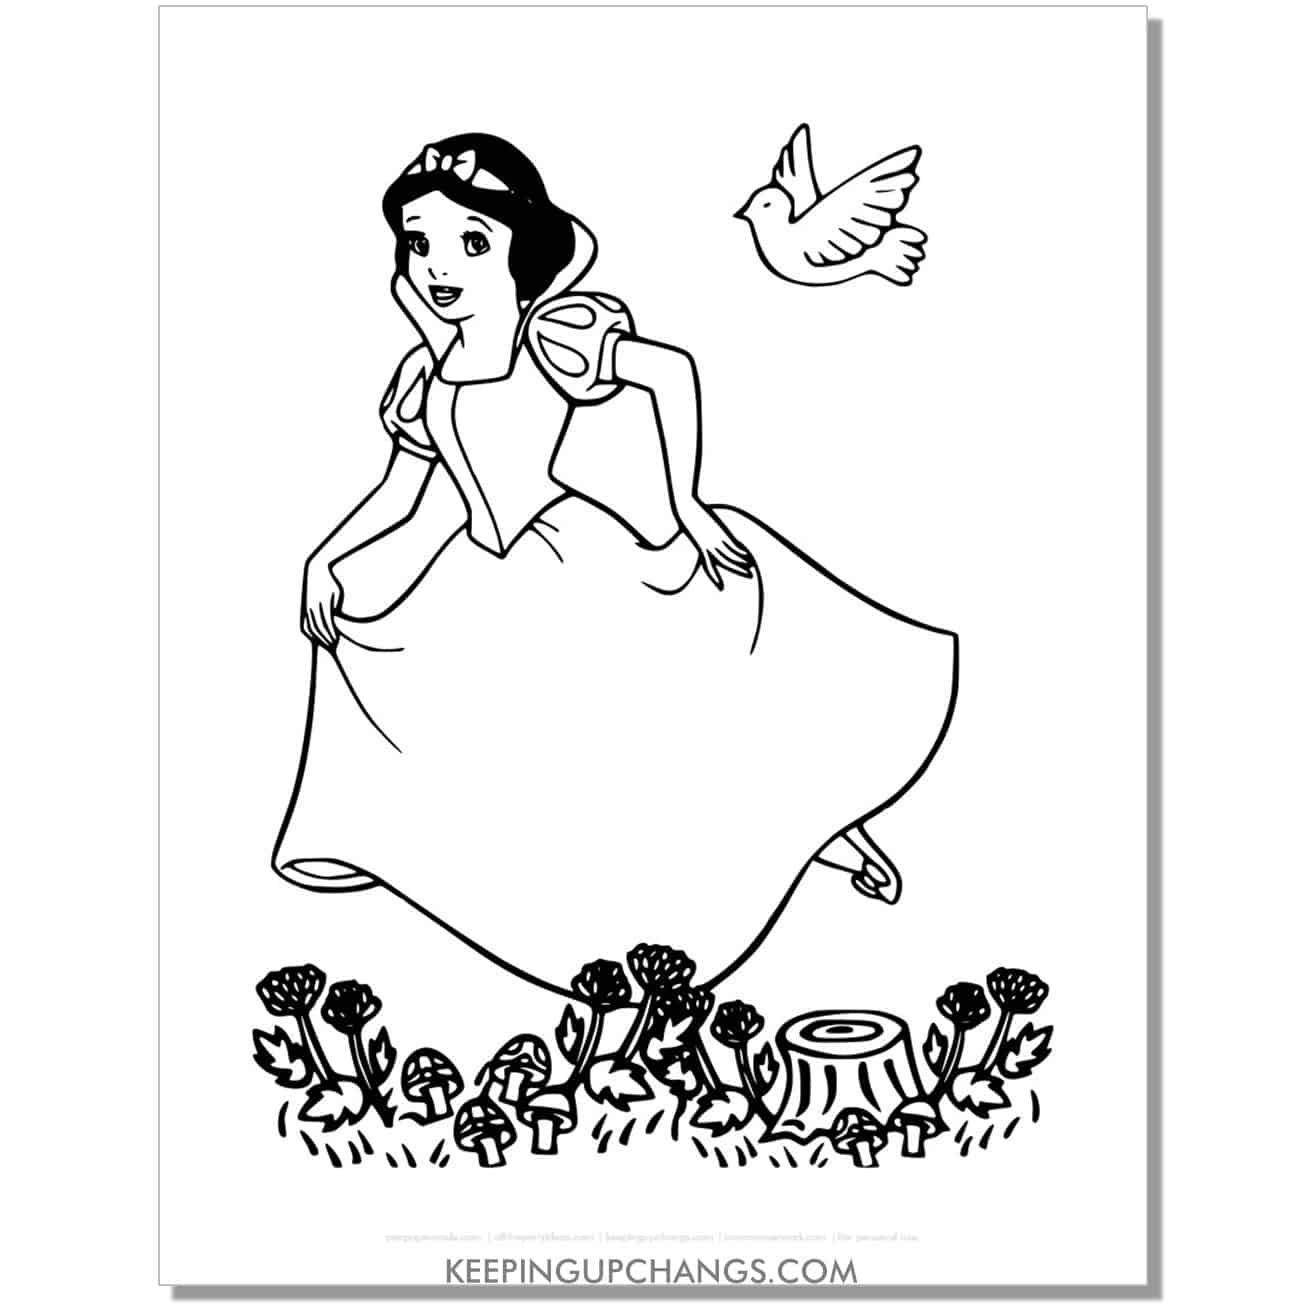 snow white traveling in forest coloring page, sheet.